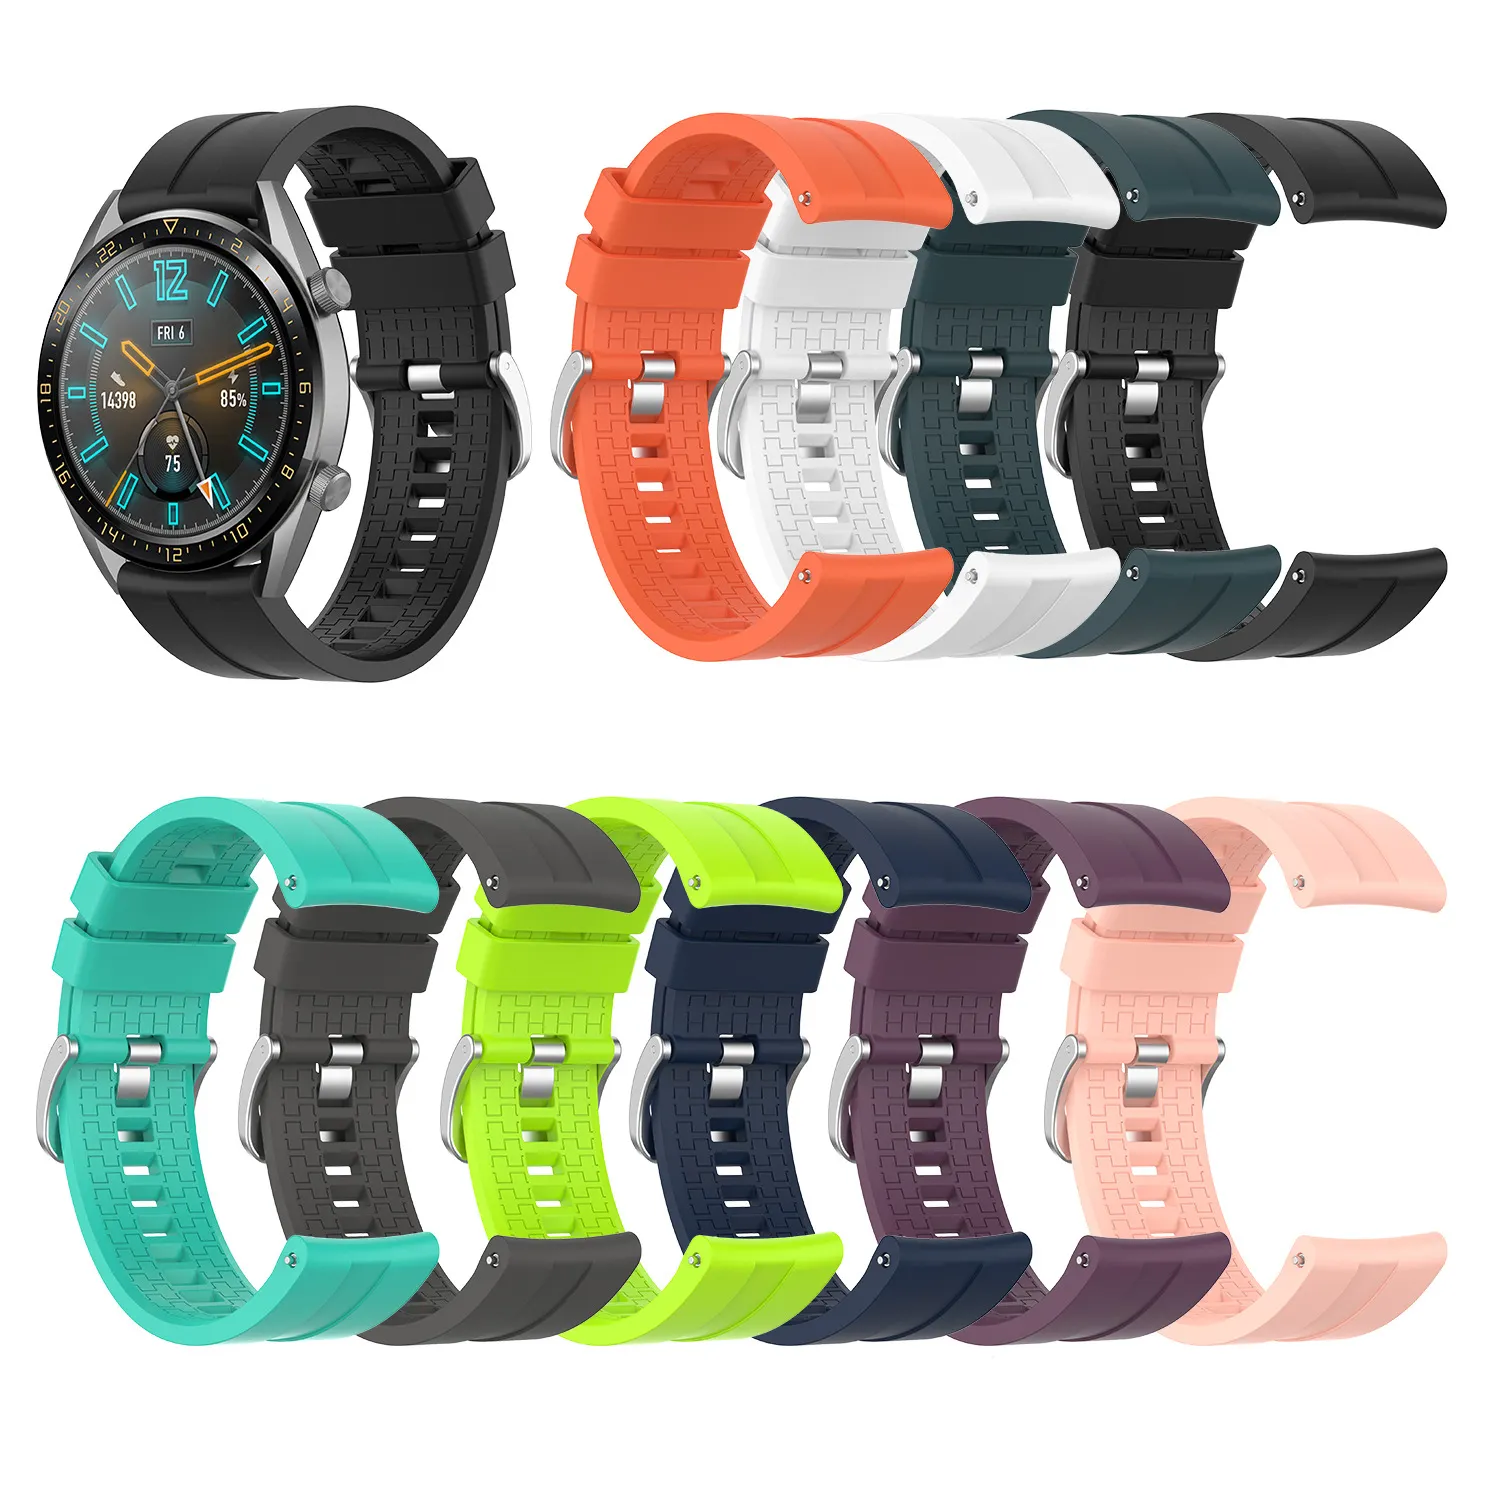 Rubber Watch Band Strap Straps Official Design Silicone 22mm for Amazfit GTR 47mm Replacement Band Sport Opp Bag 21mm